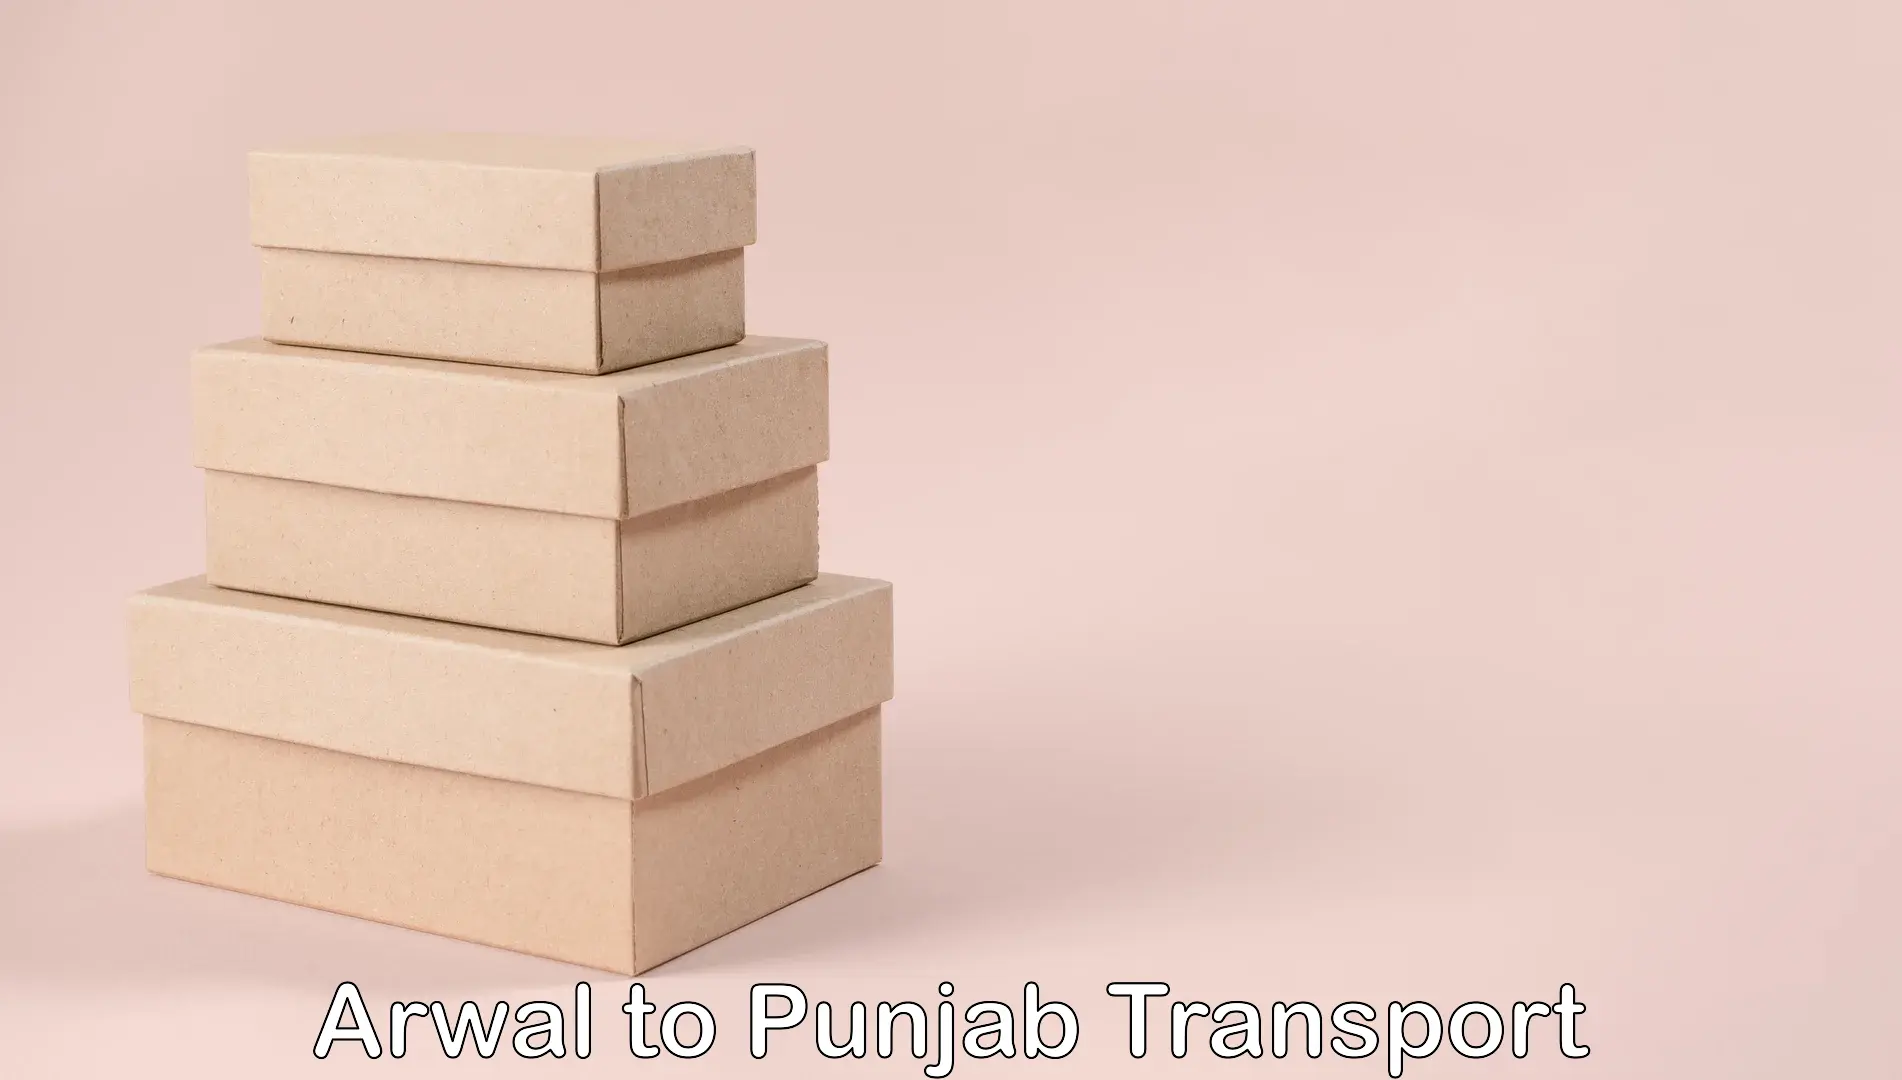 Daily parcel service transport Arwal to Amritsar